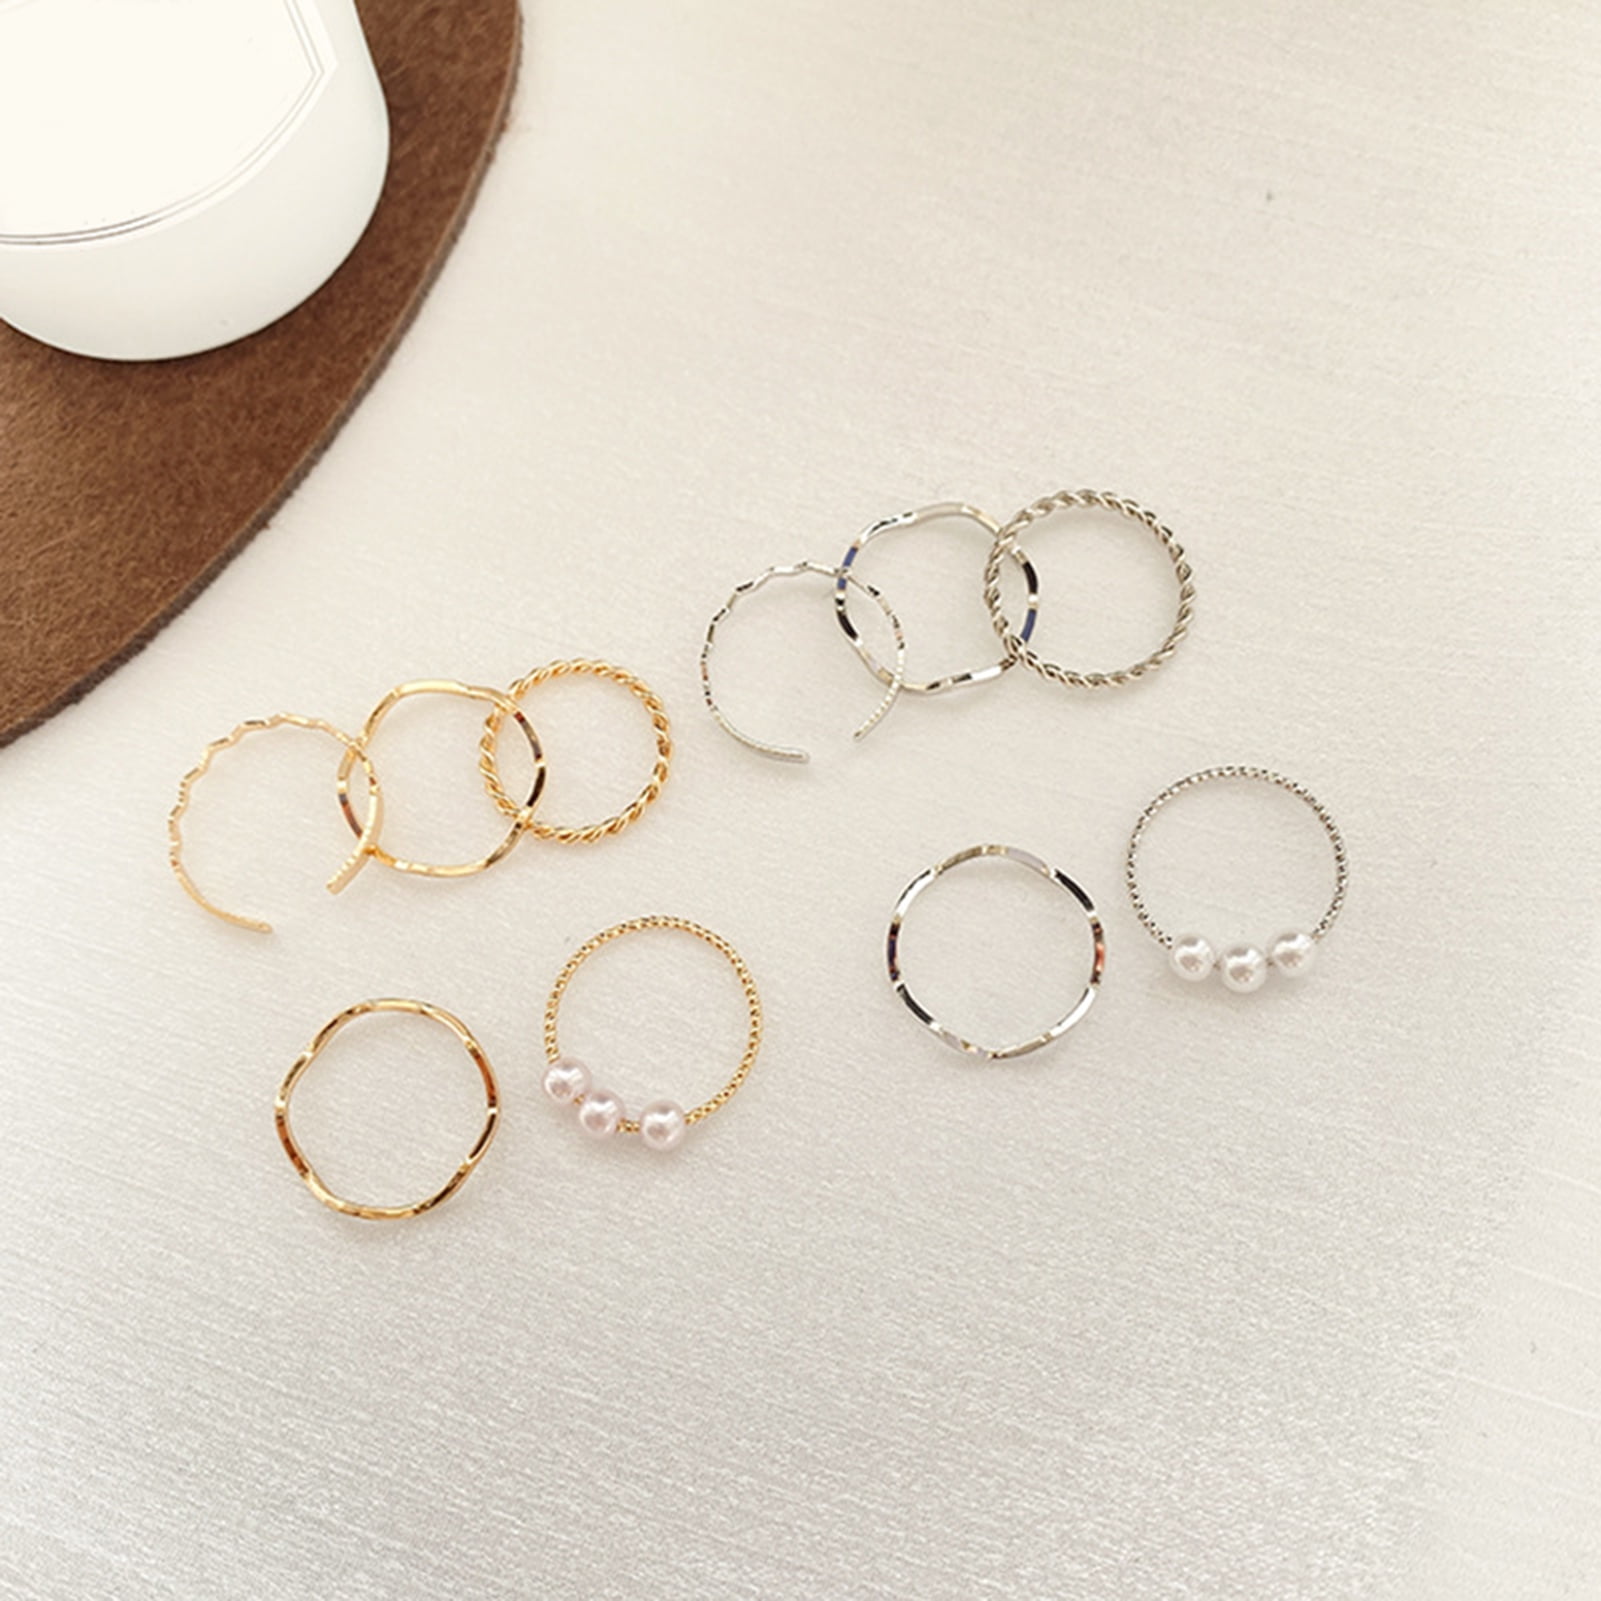 AYYUFE 1 Set Finger Ring Integrated Artistic Alloy Chain Design Ring Set  Jewelry Accessories